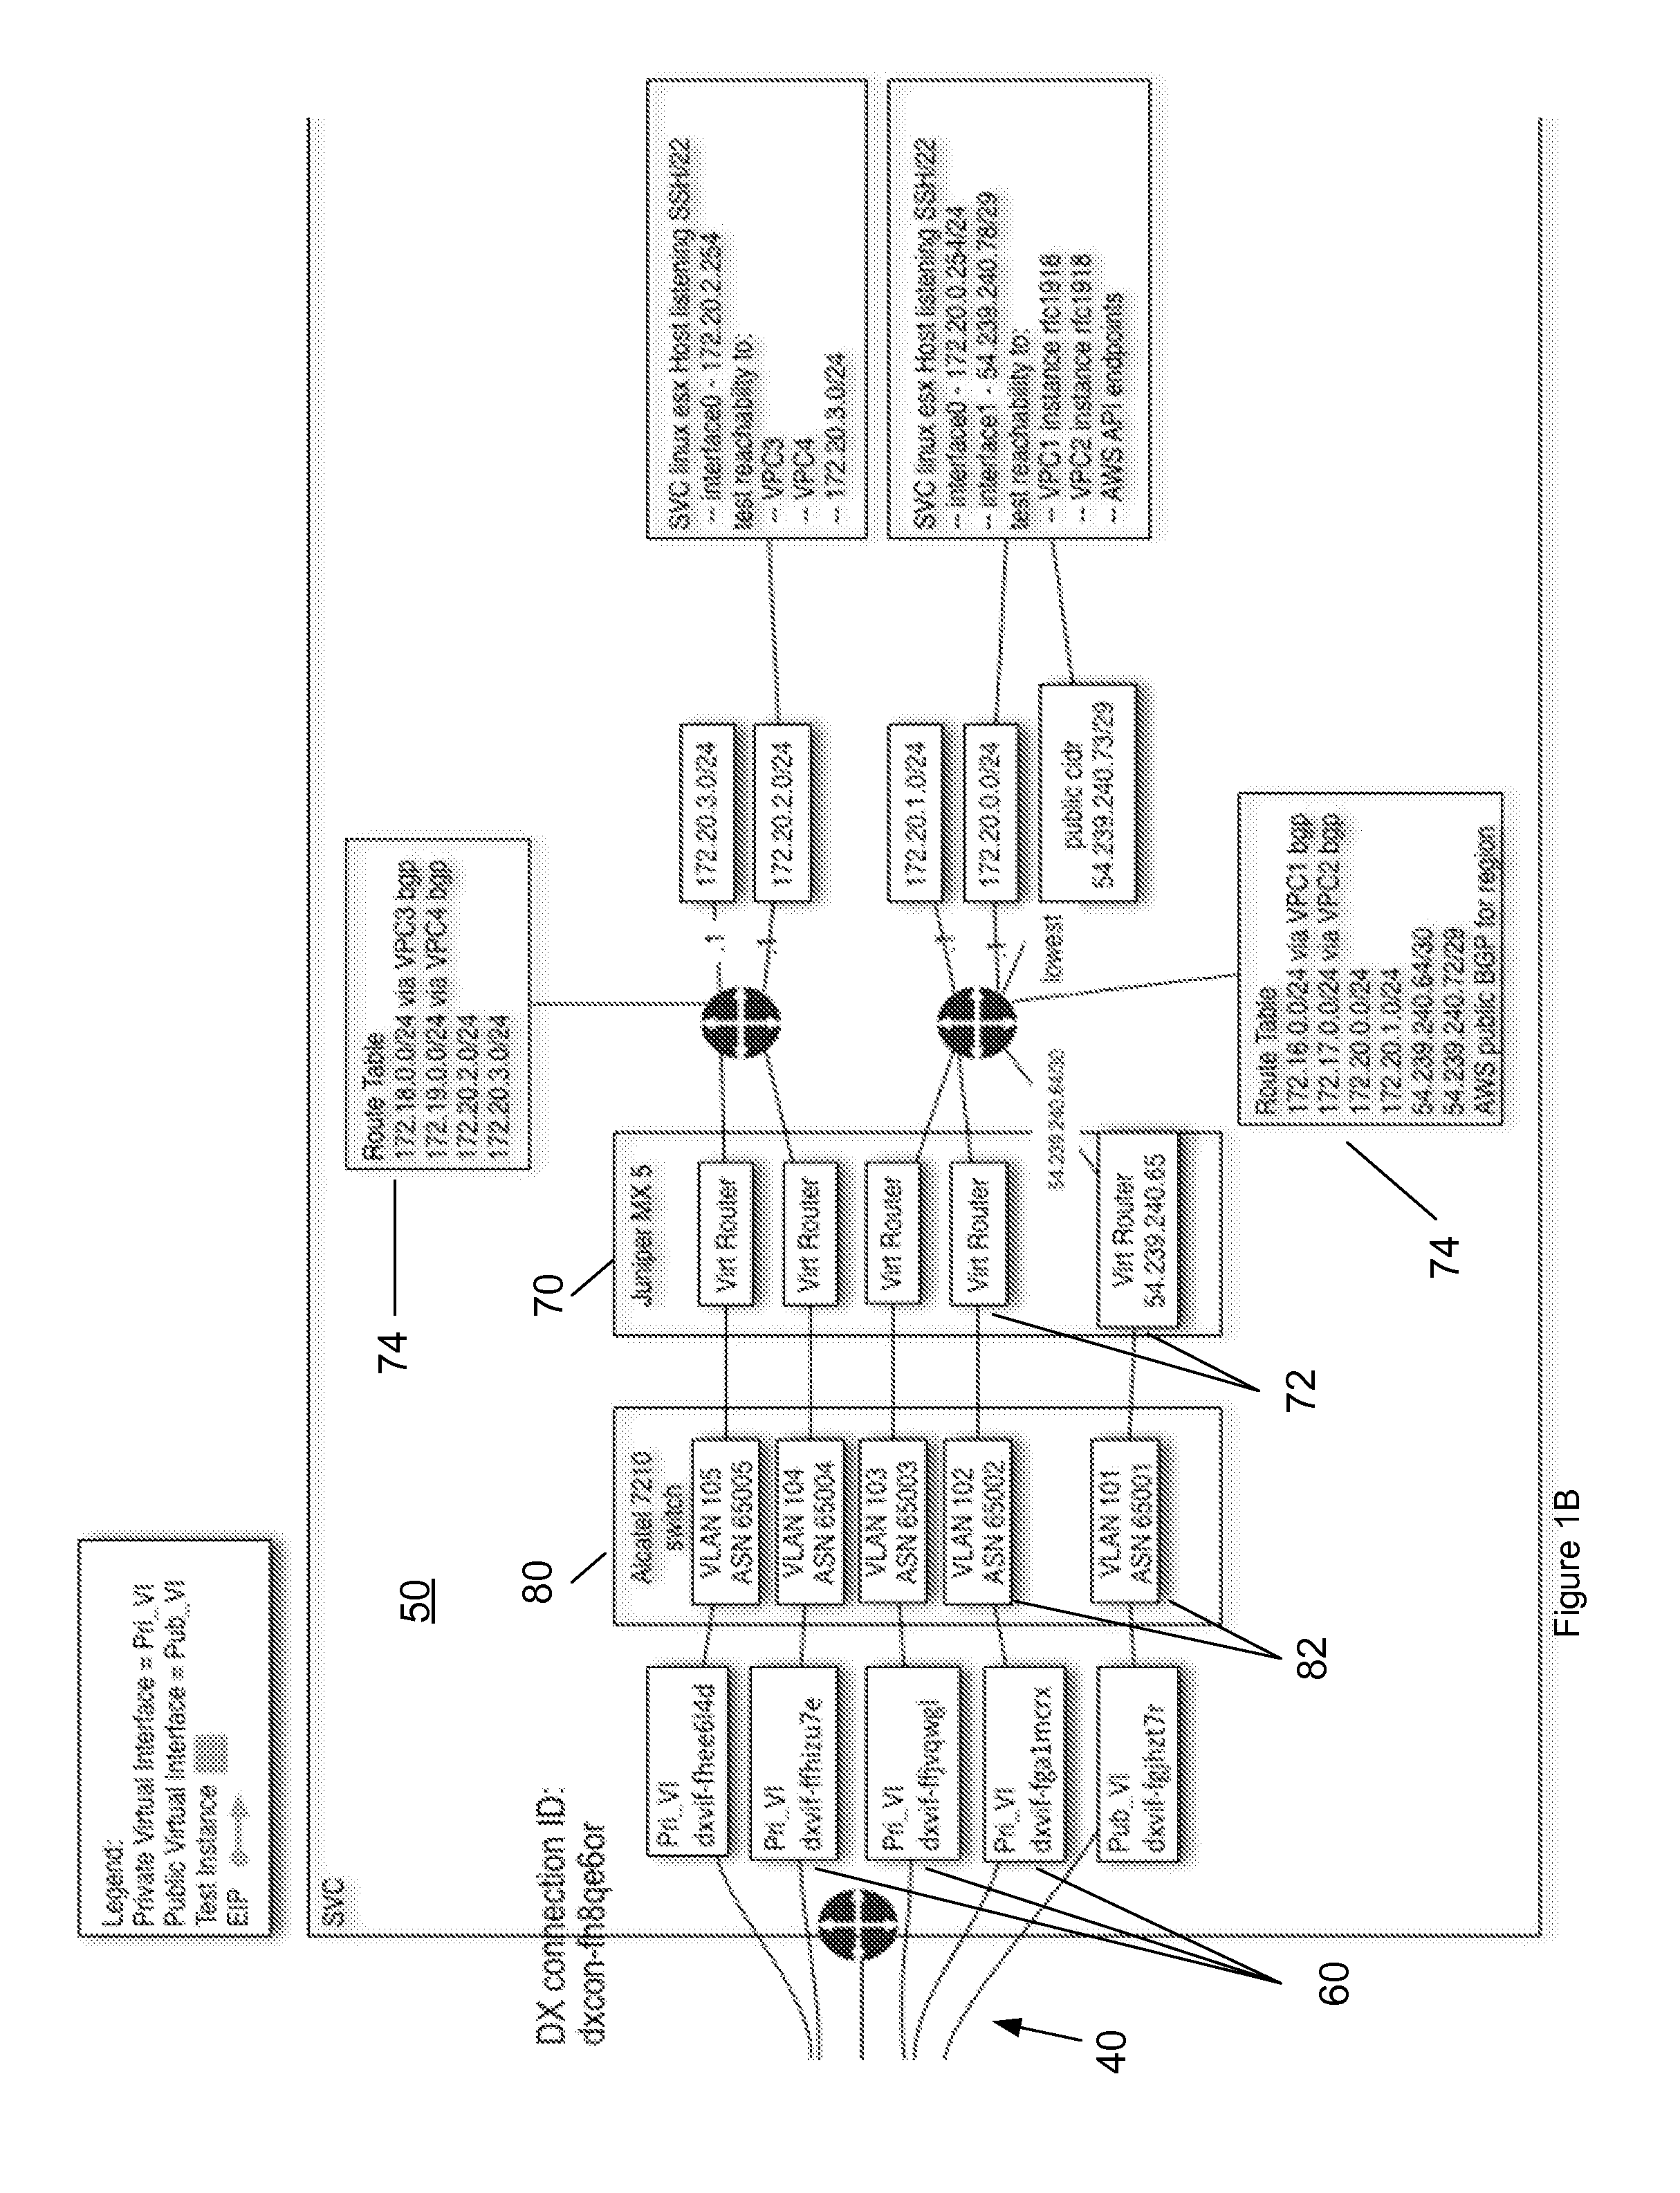 Direct Connect Virtual Private Interface for a One to Many Connection with Multiple Virtual Private Clouds